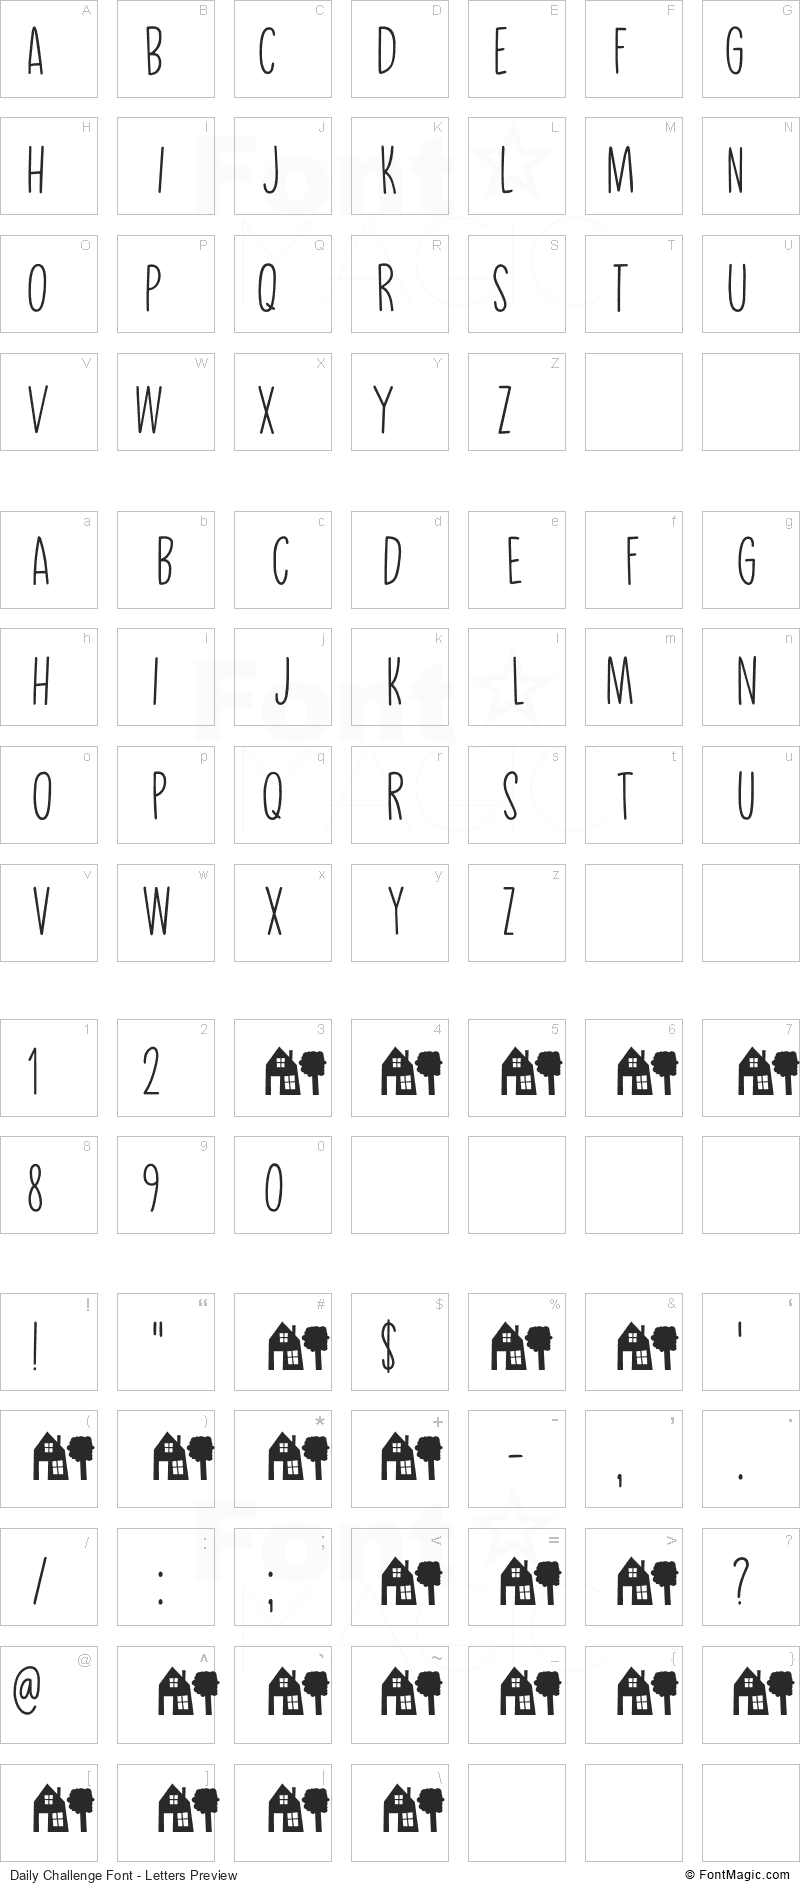 Daily Challenge Font - All Latters Preview Chart